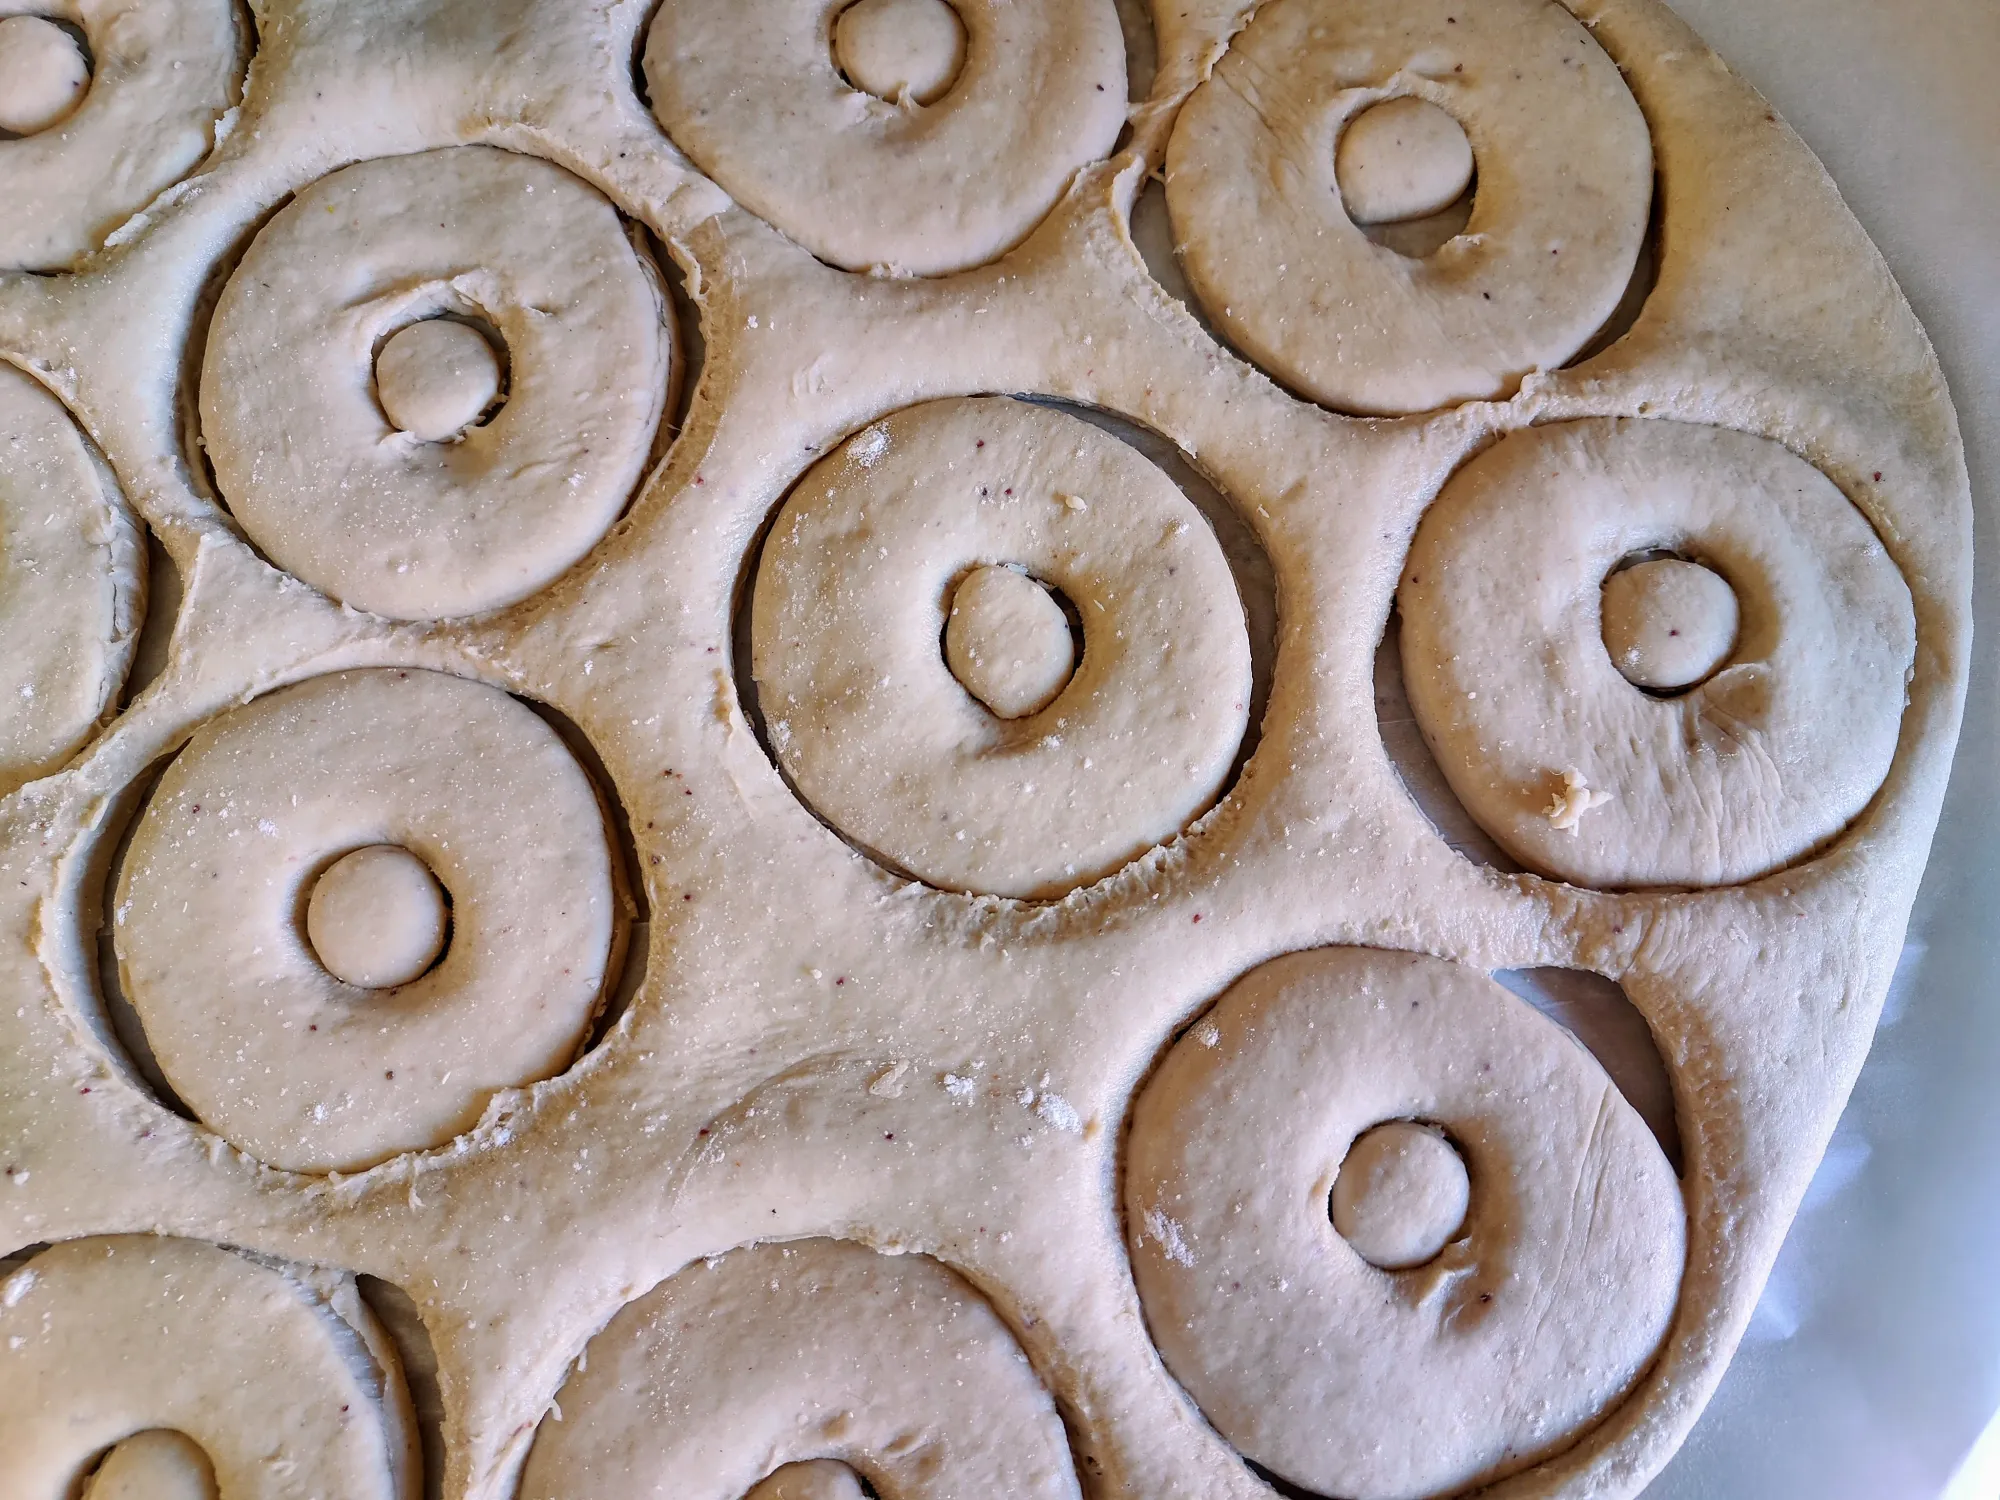 Rolled out dough with circles cut out of it, and smaller circles cut out of those to make ring outlines.